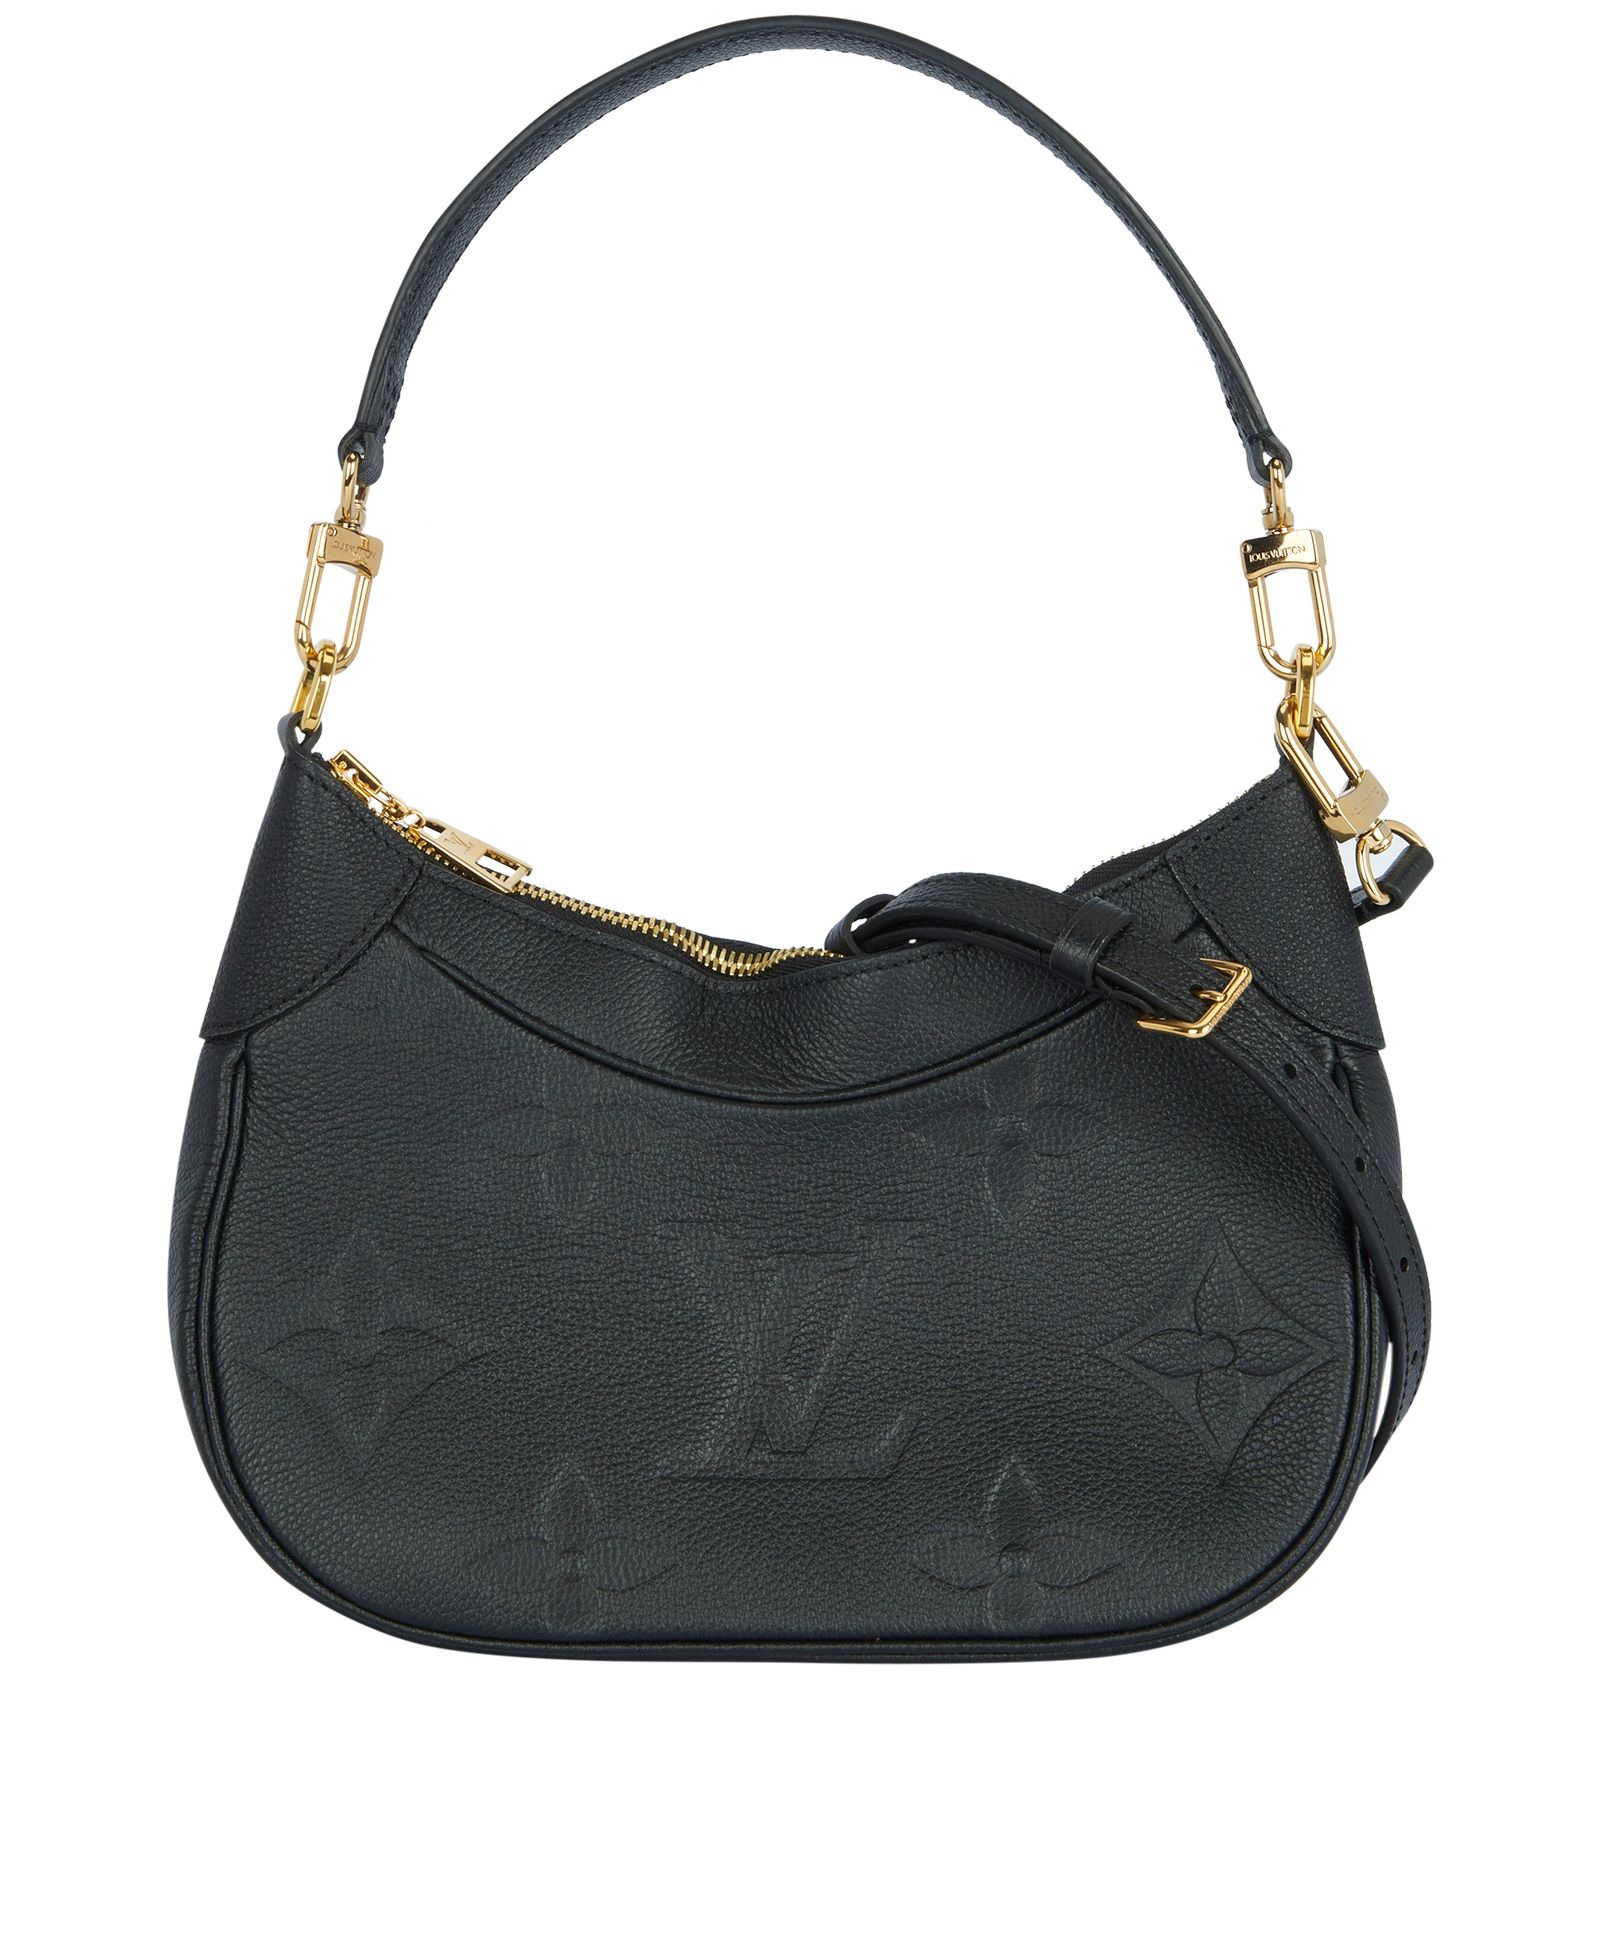 Louis Vuitton On My Side Grey Leather Handbag (Pre-Owned)